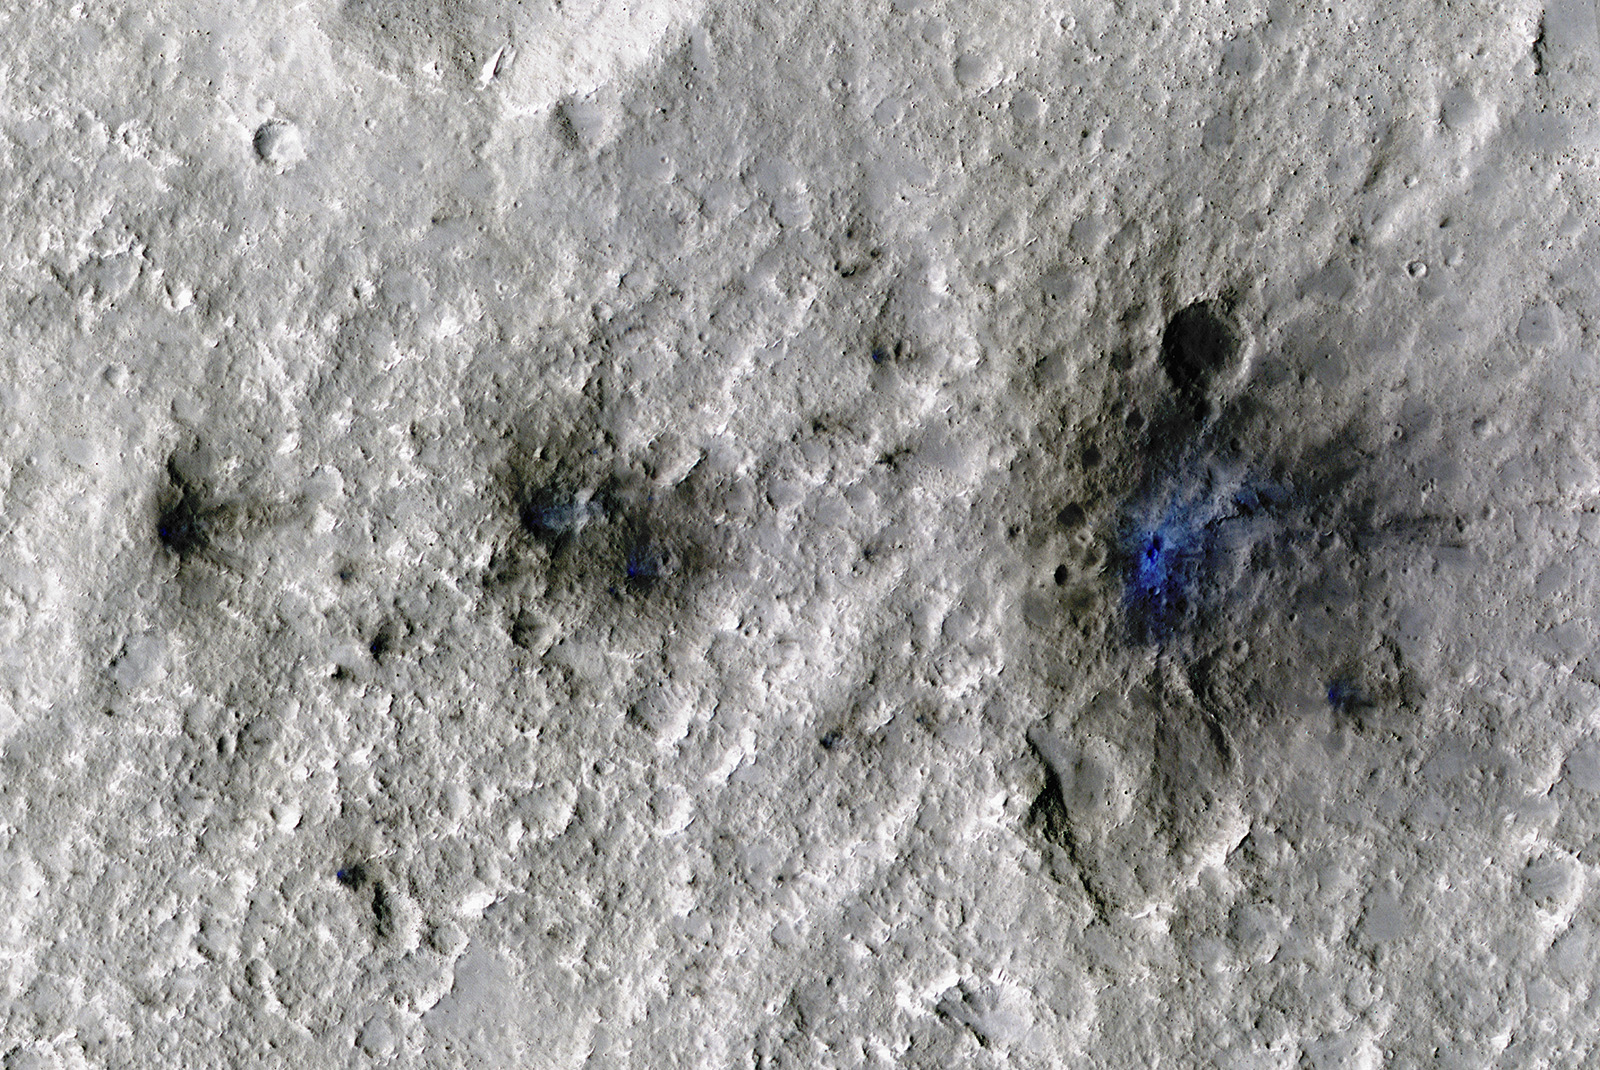 A direct overhead view of a light-gray-colored cratered surface is interrupted by three black splotches of increasing size from left to right. At the center of each dark scar is a royal blue splotch. The surface around the blue center looks as if it's been sprayed with a dark material that extends farther on the right side of each crater than on the left.